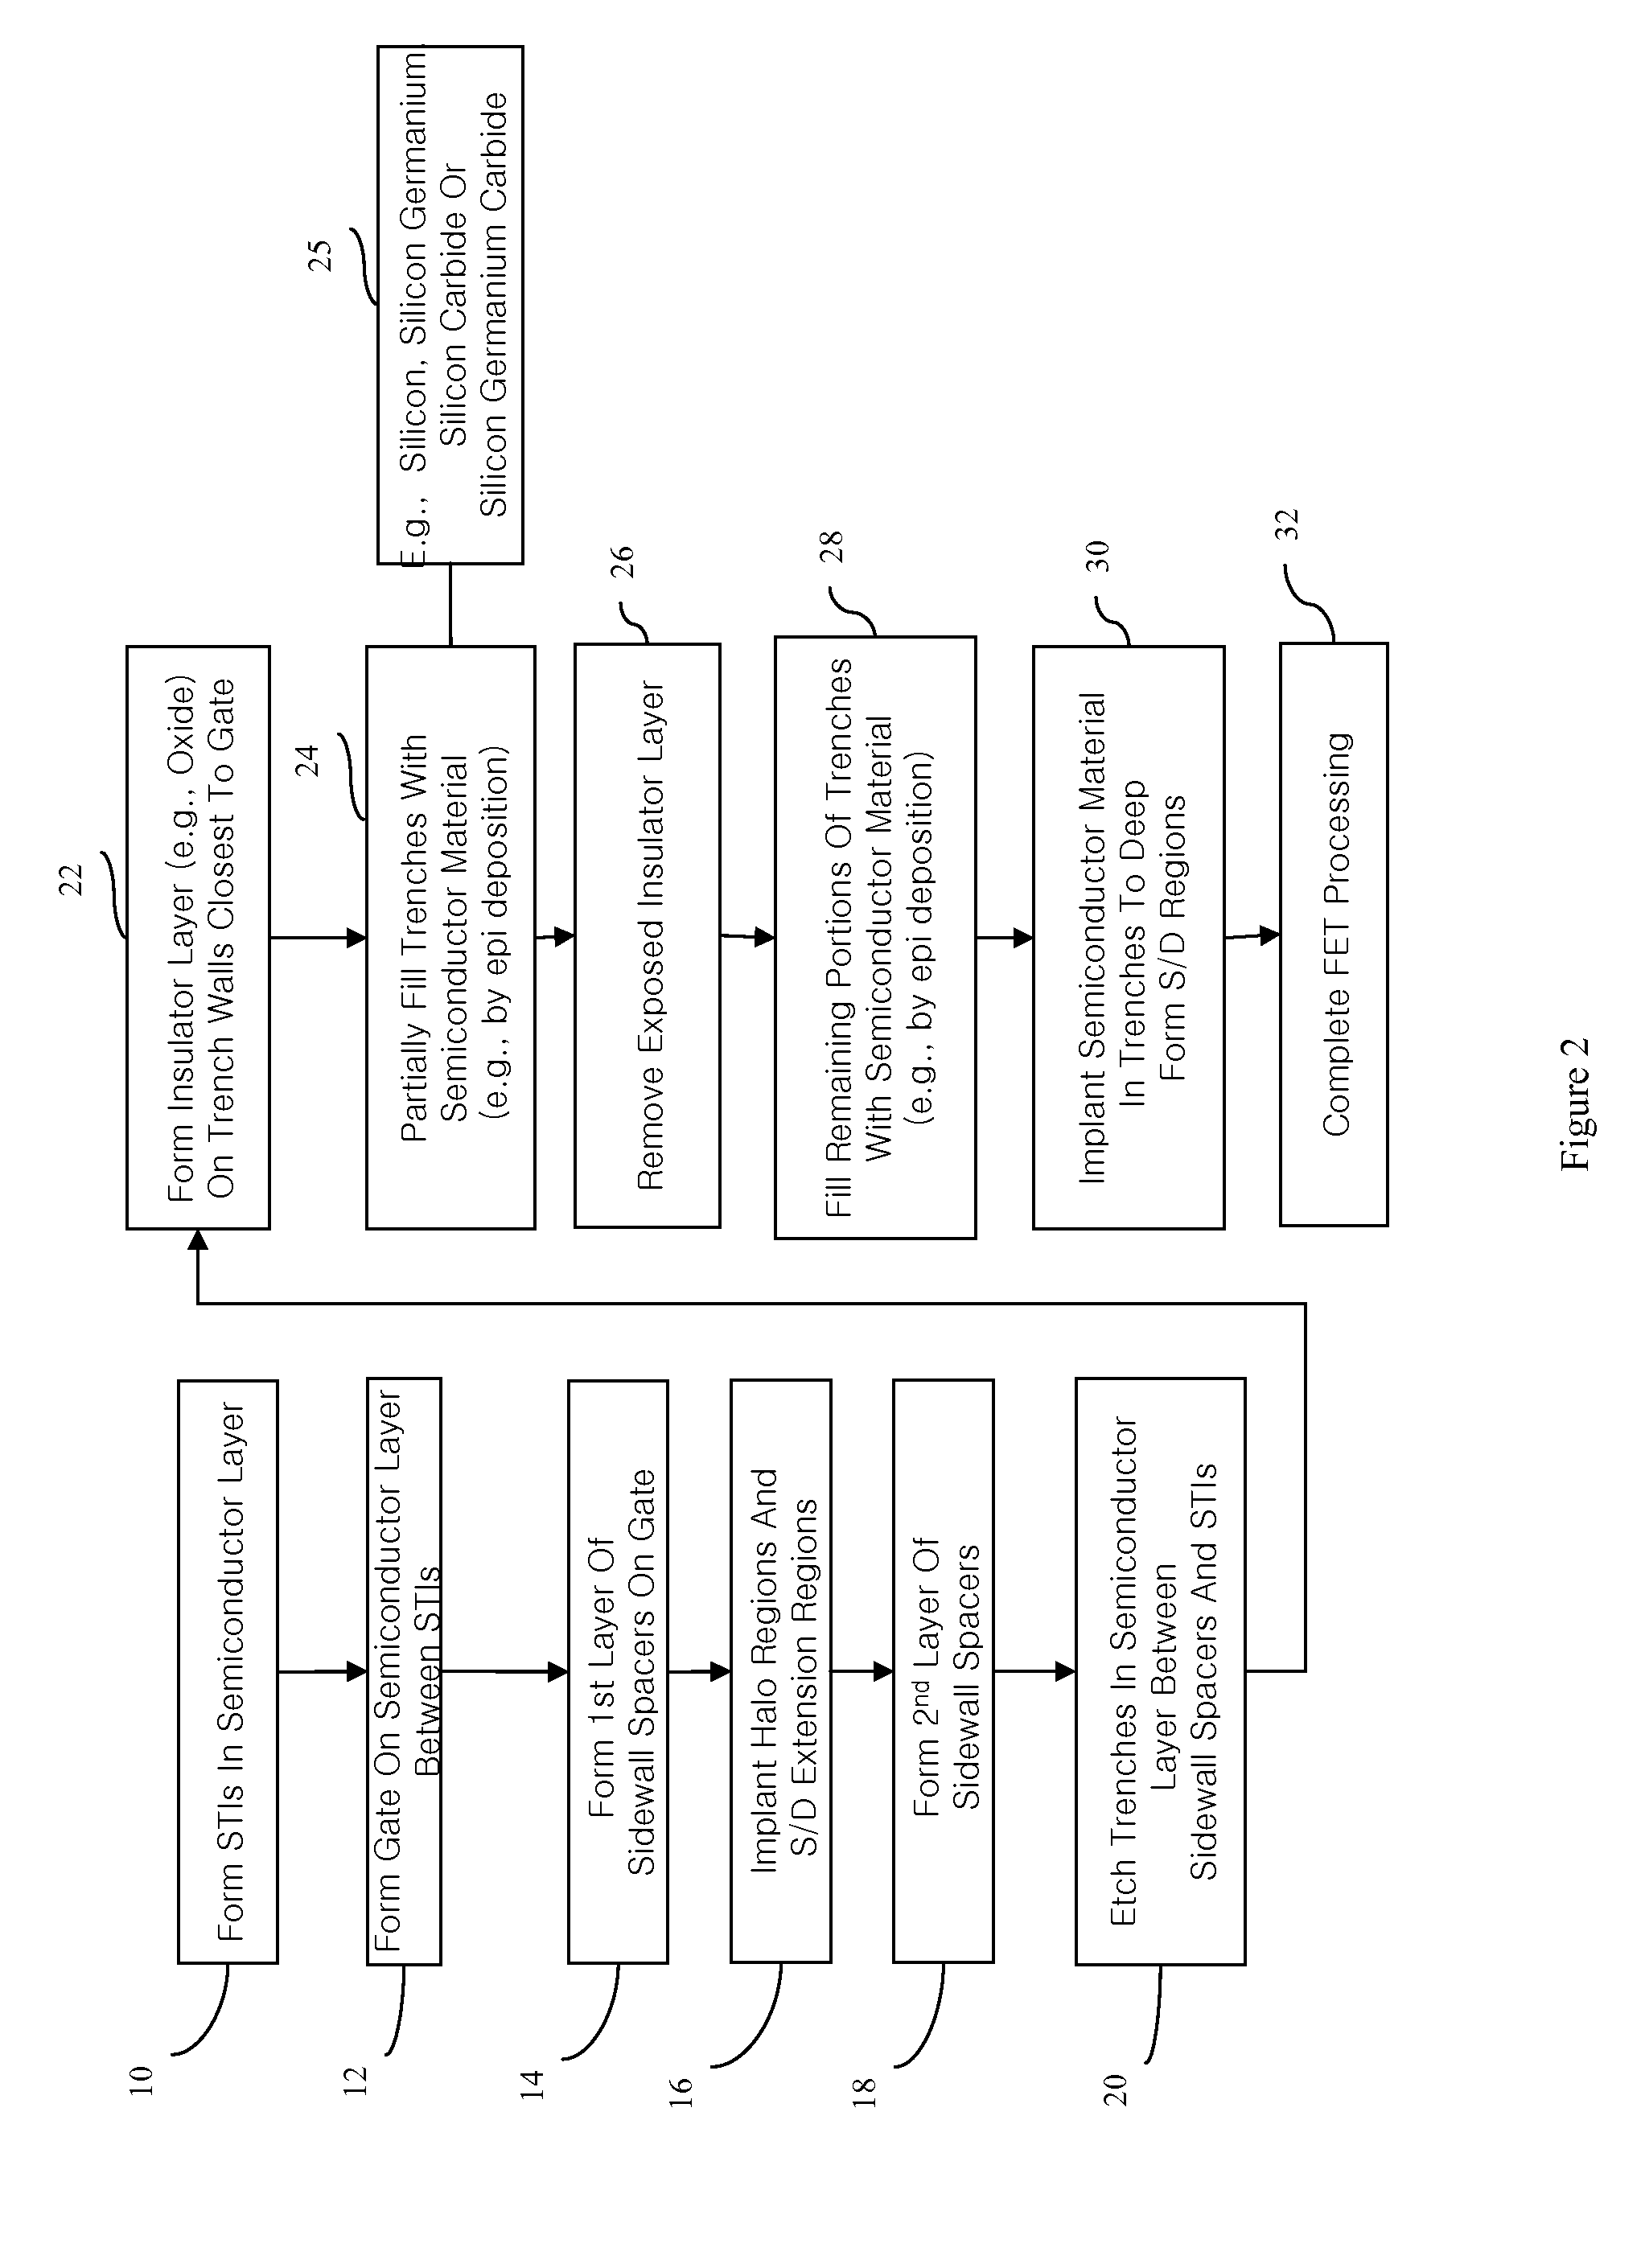 Structure and method to improve short channel effects in metal oxide semiconductor field effect transistors